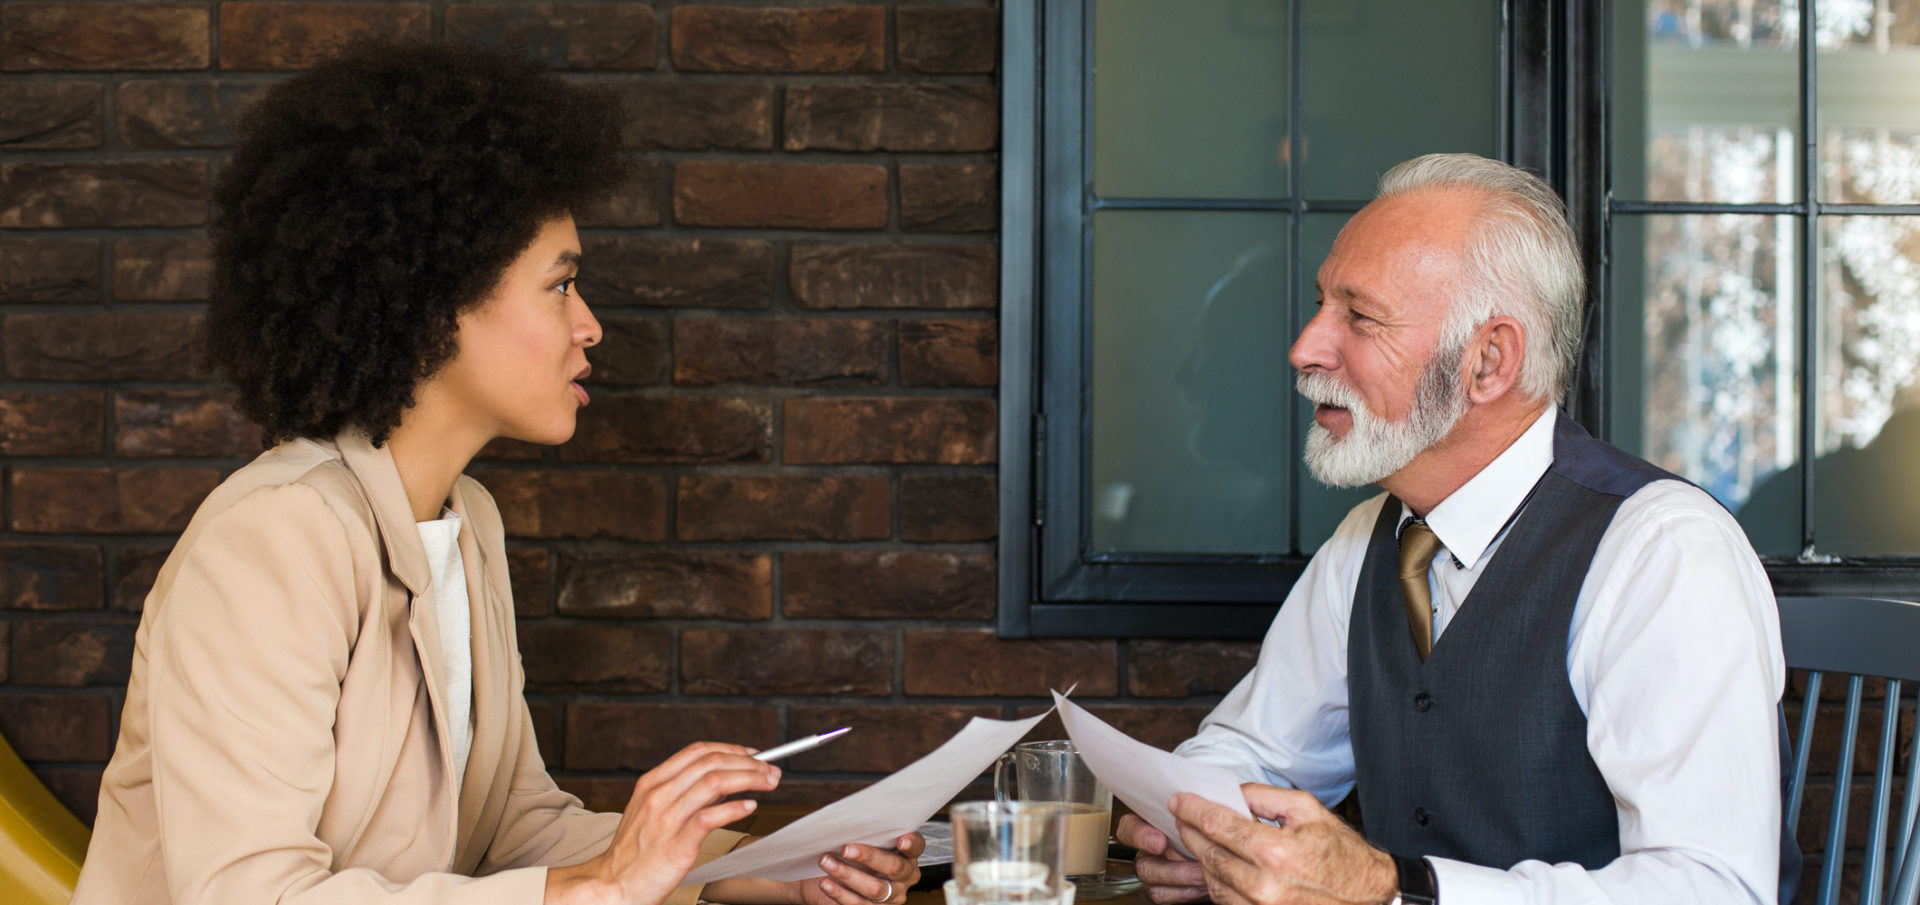 Business man and woman reviewing some documents. Business Impact article image for how to get reverse mentoring right — and why it's key to tackling diversity.